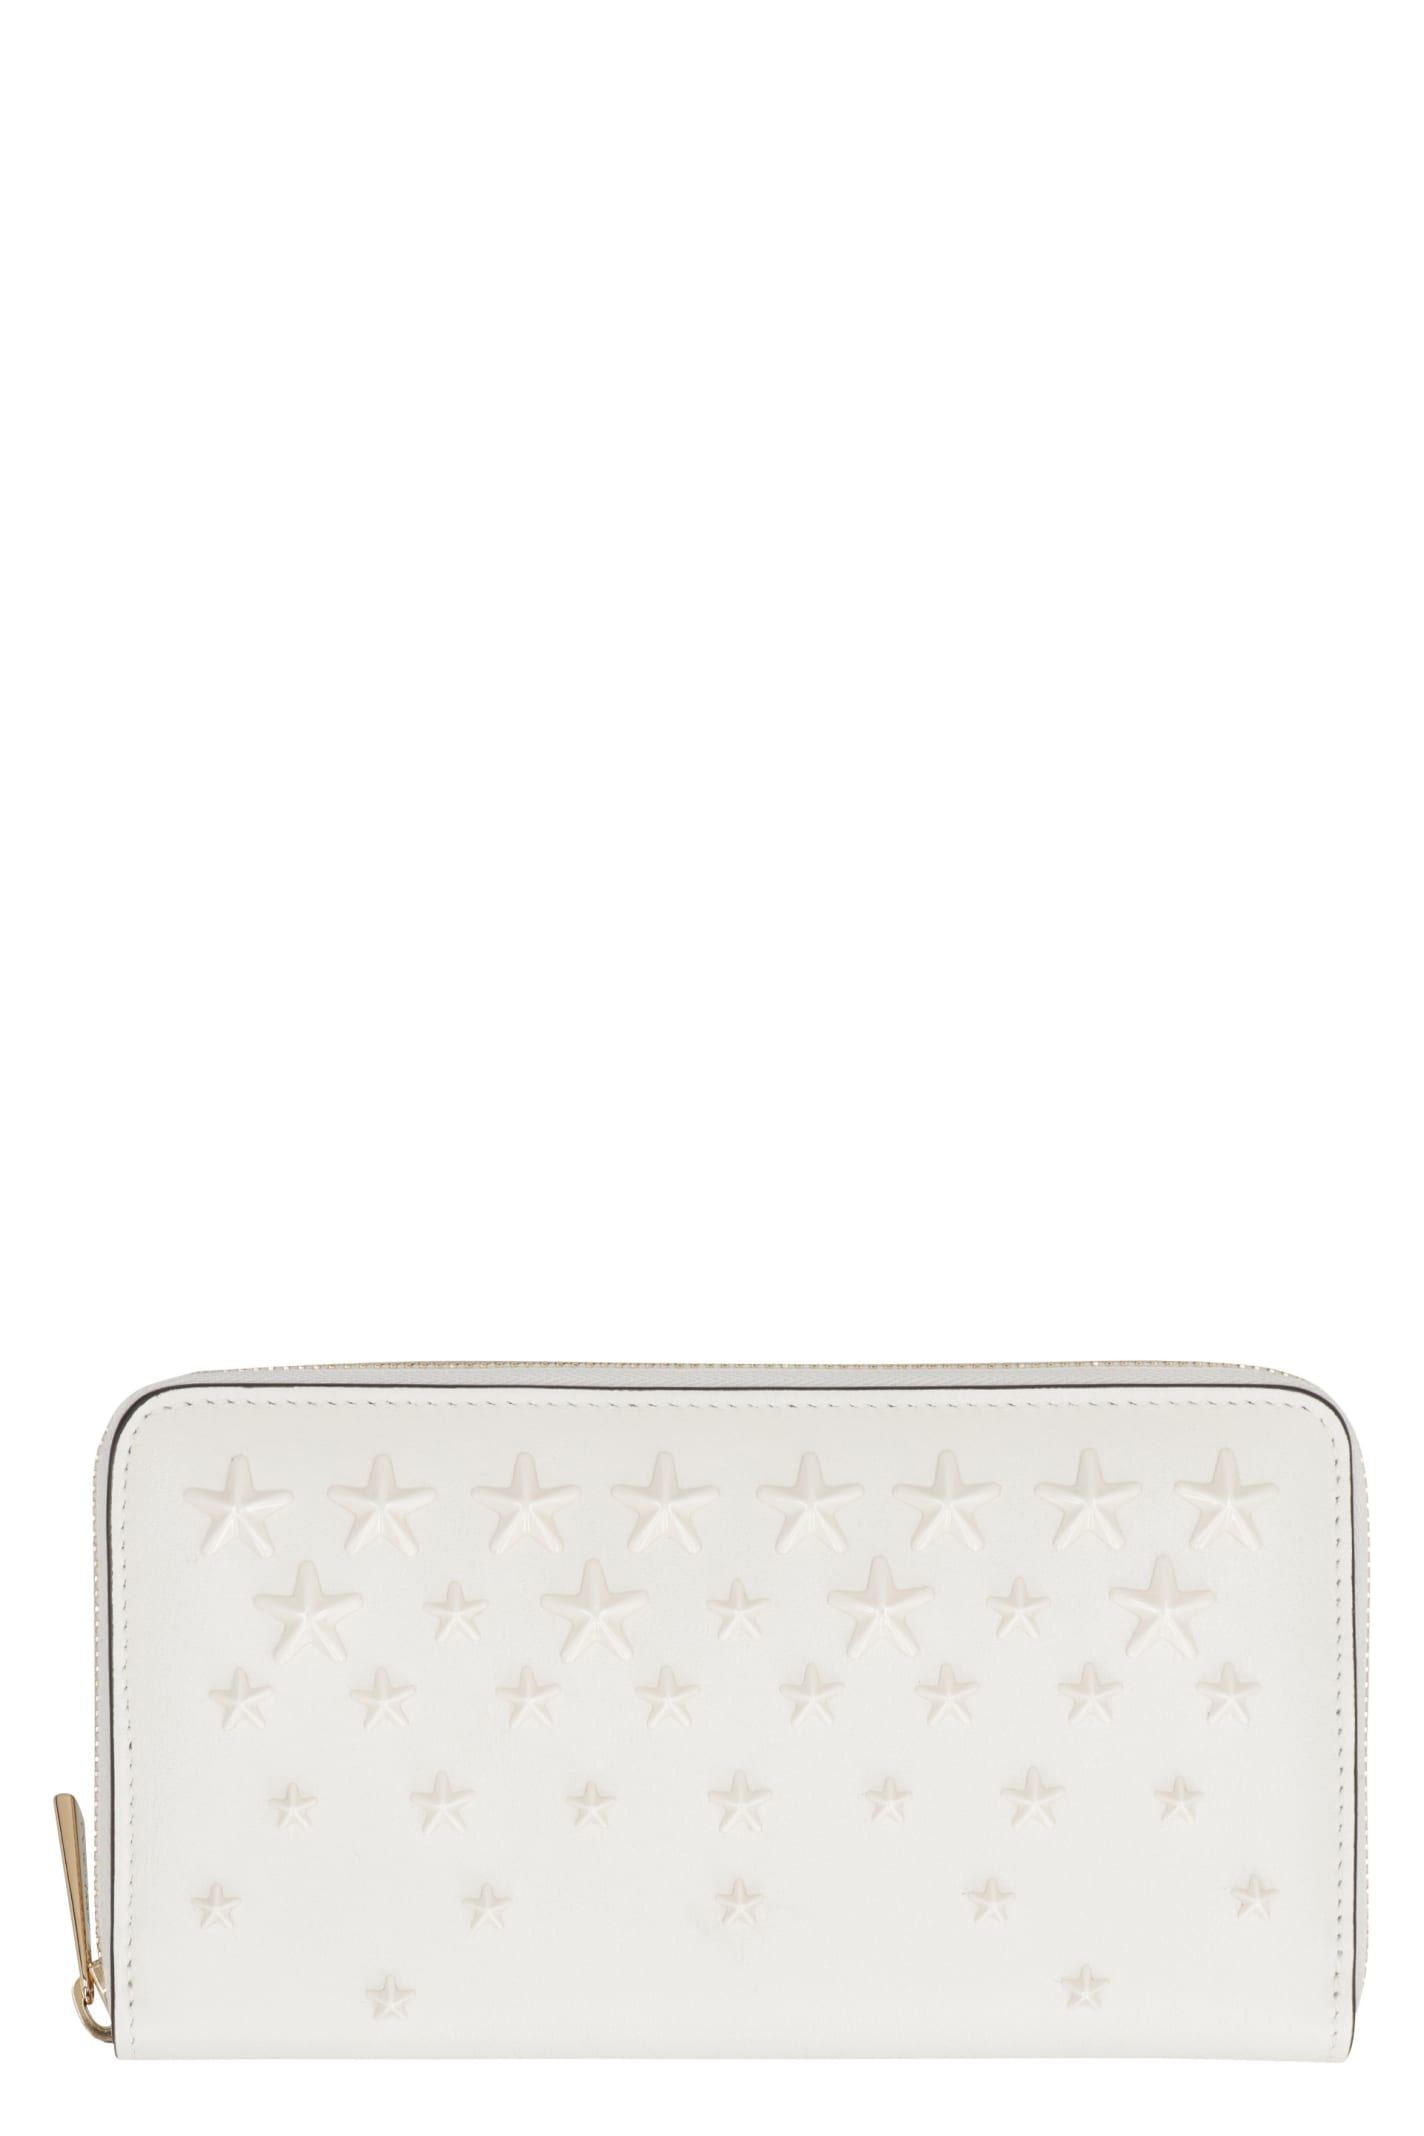 Jimmy Choo Pippa Leather Wallet In White